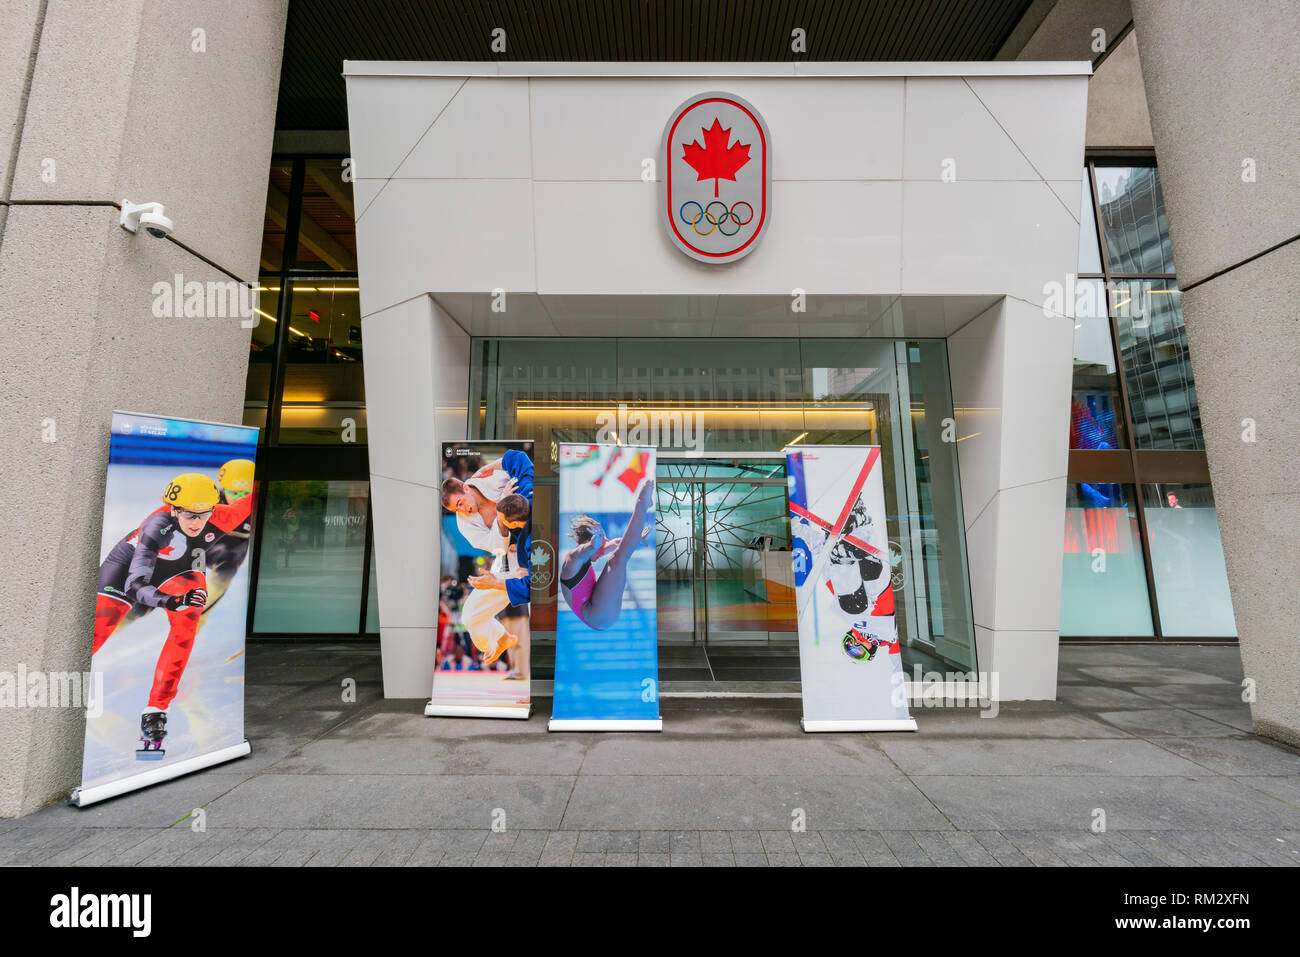 Montreal, Ott 3: Ingresso della Canadian Olympic House il Ott 3, 2018 a Montreal, Quebec, Canada Foto Stock